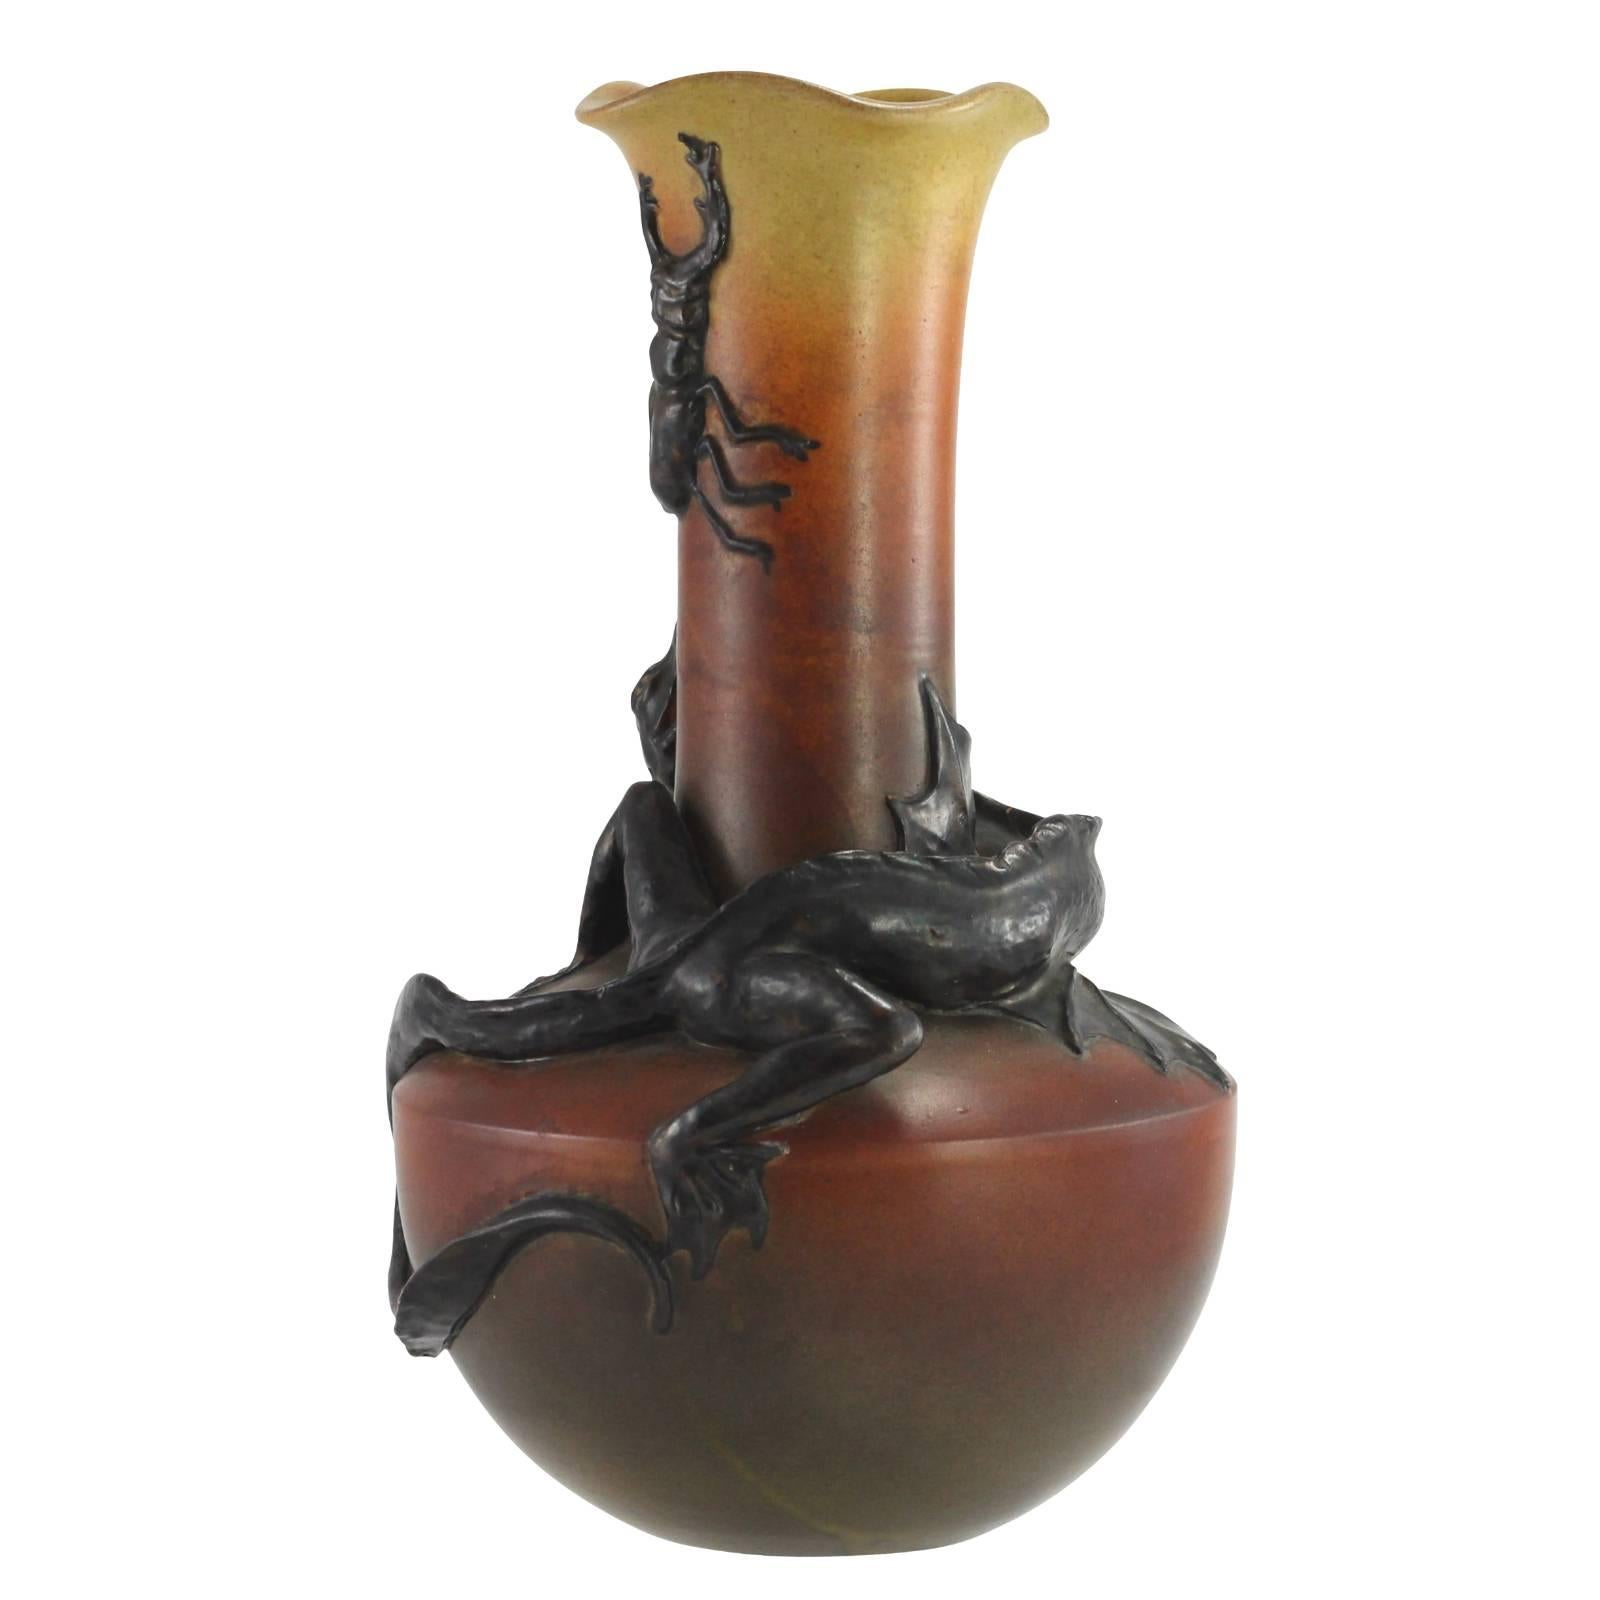 A Danish Art Nouveau vase featuring a brown to red to yellow ground, mounted with a large stag beetle and lizard. The piece is stamped “P. Ipsen. Kjobenhavn. 331″. After Ipsen passed away in 1860, his wife, Lovise, took over the factory until their